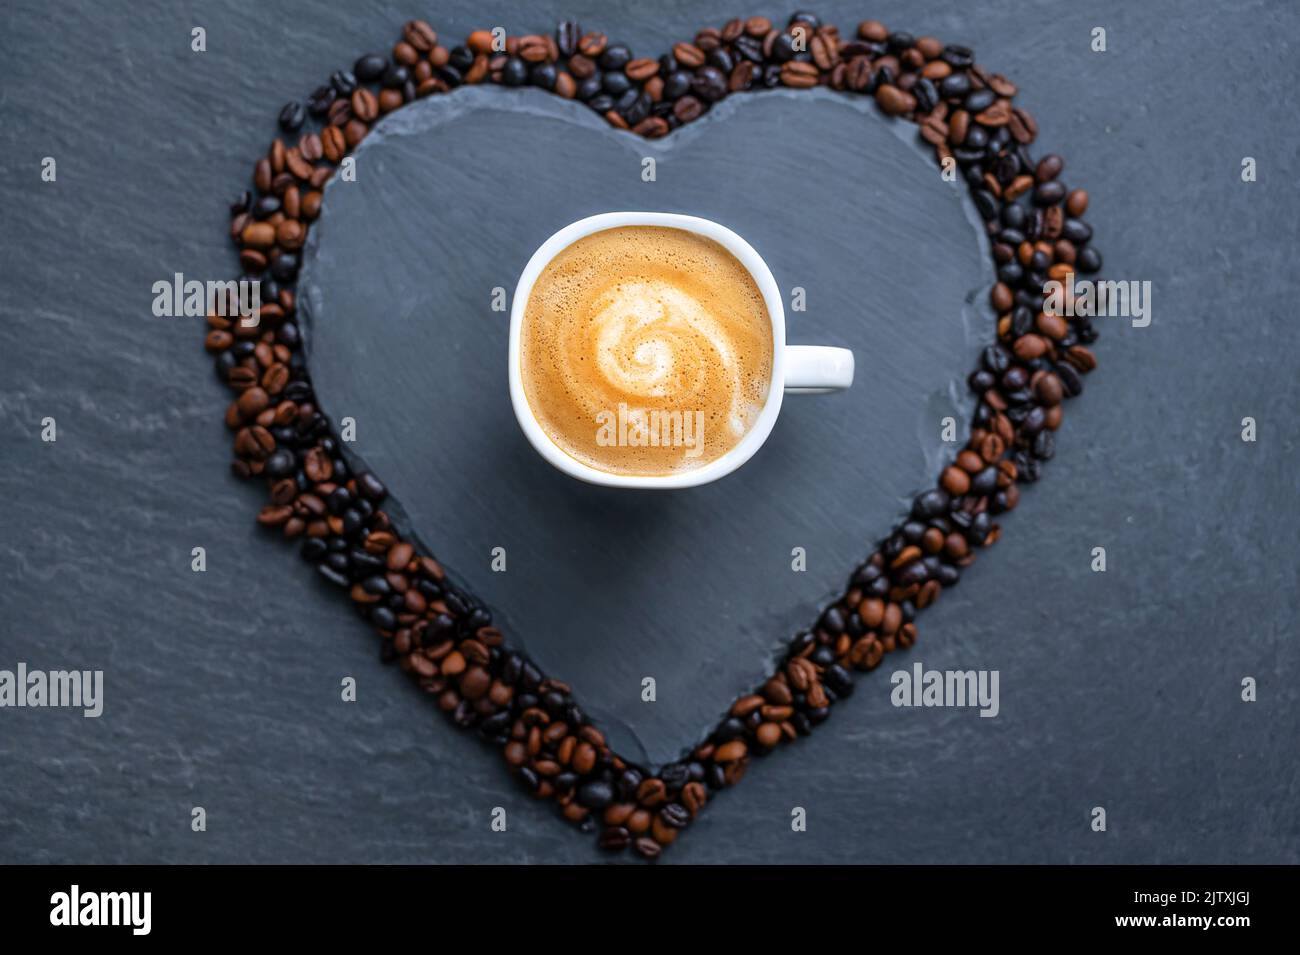 Delicious cup of coffee on a heart made of slate rimmed with coffee beans Stock Photo